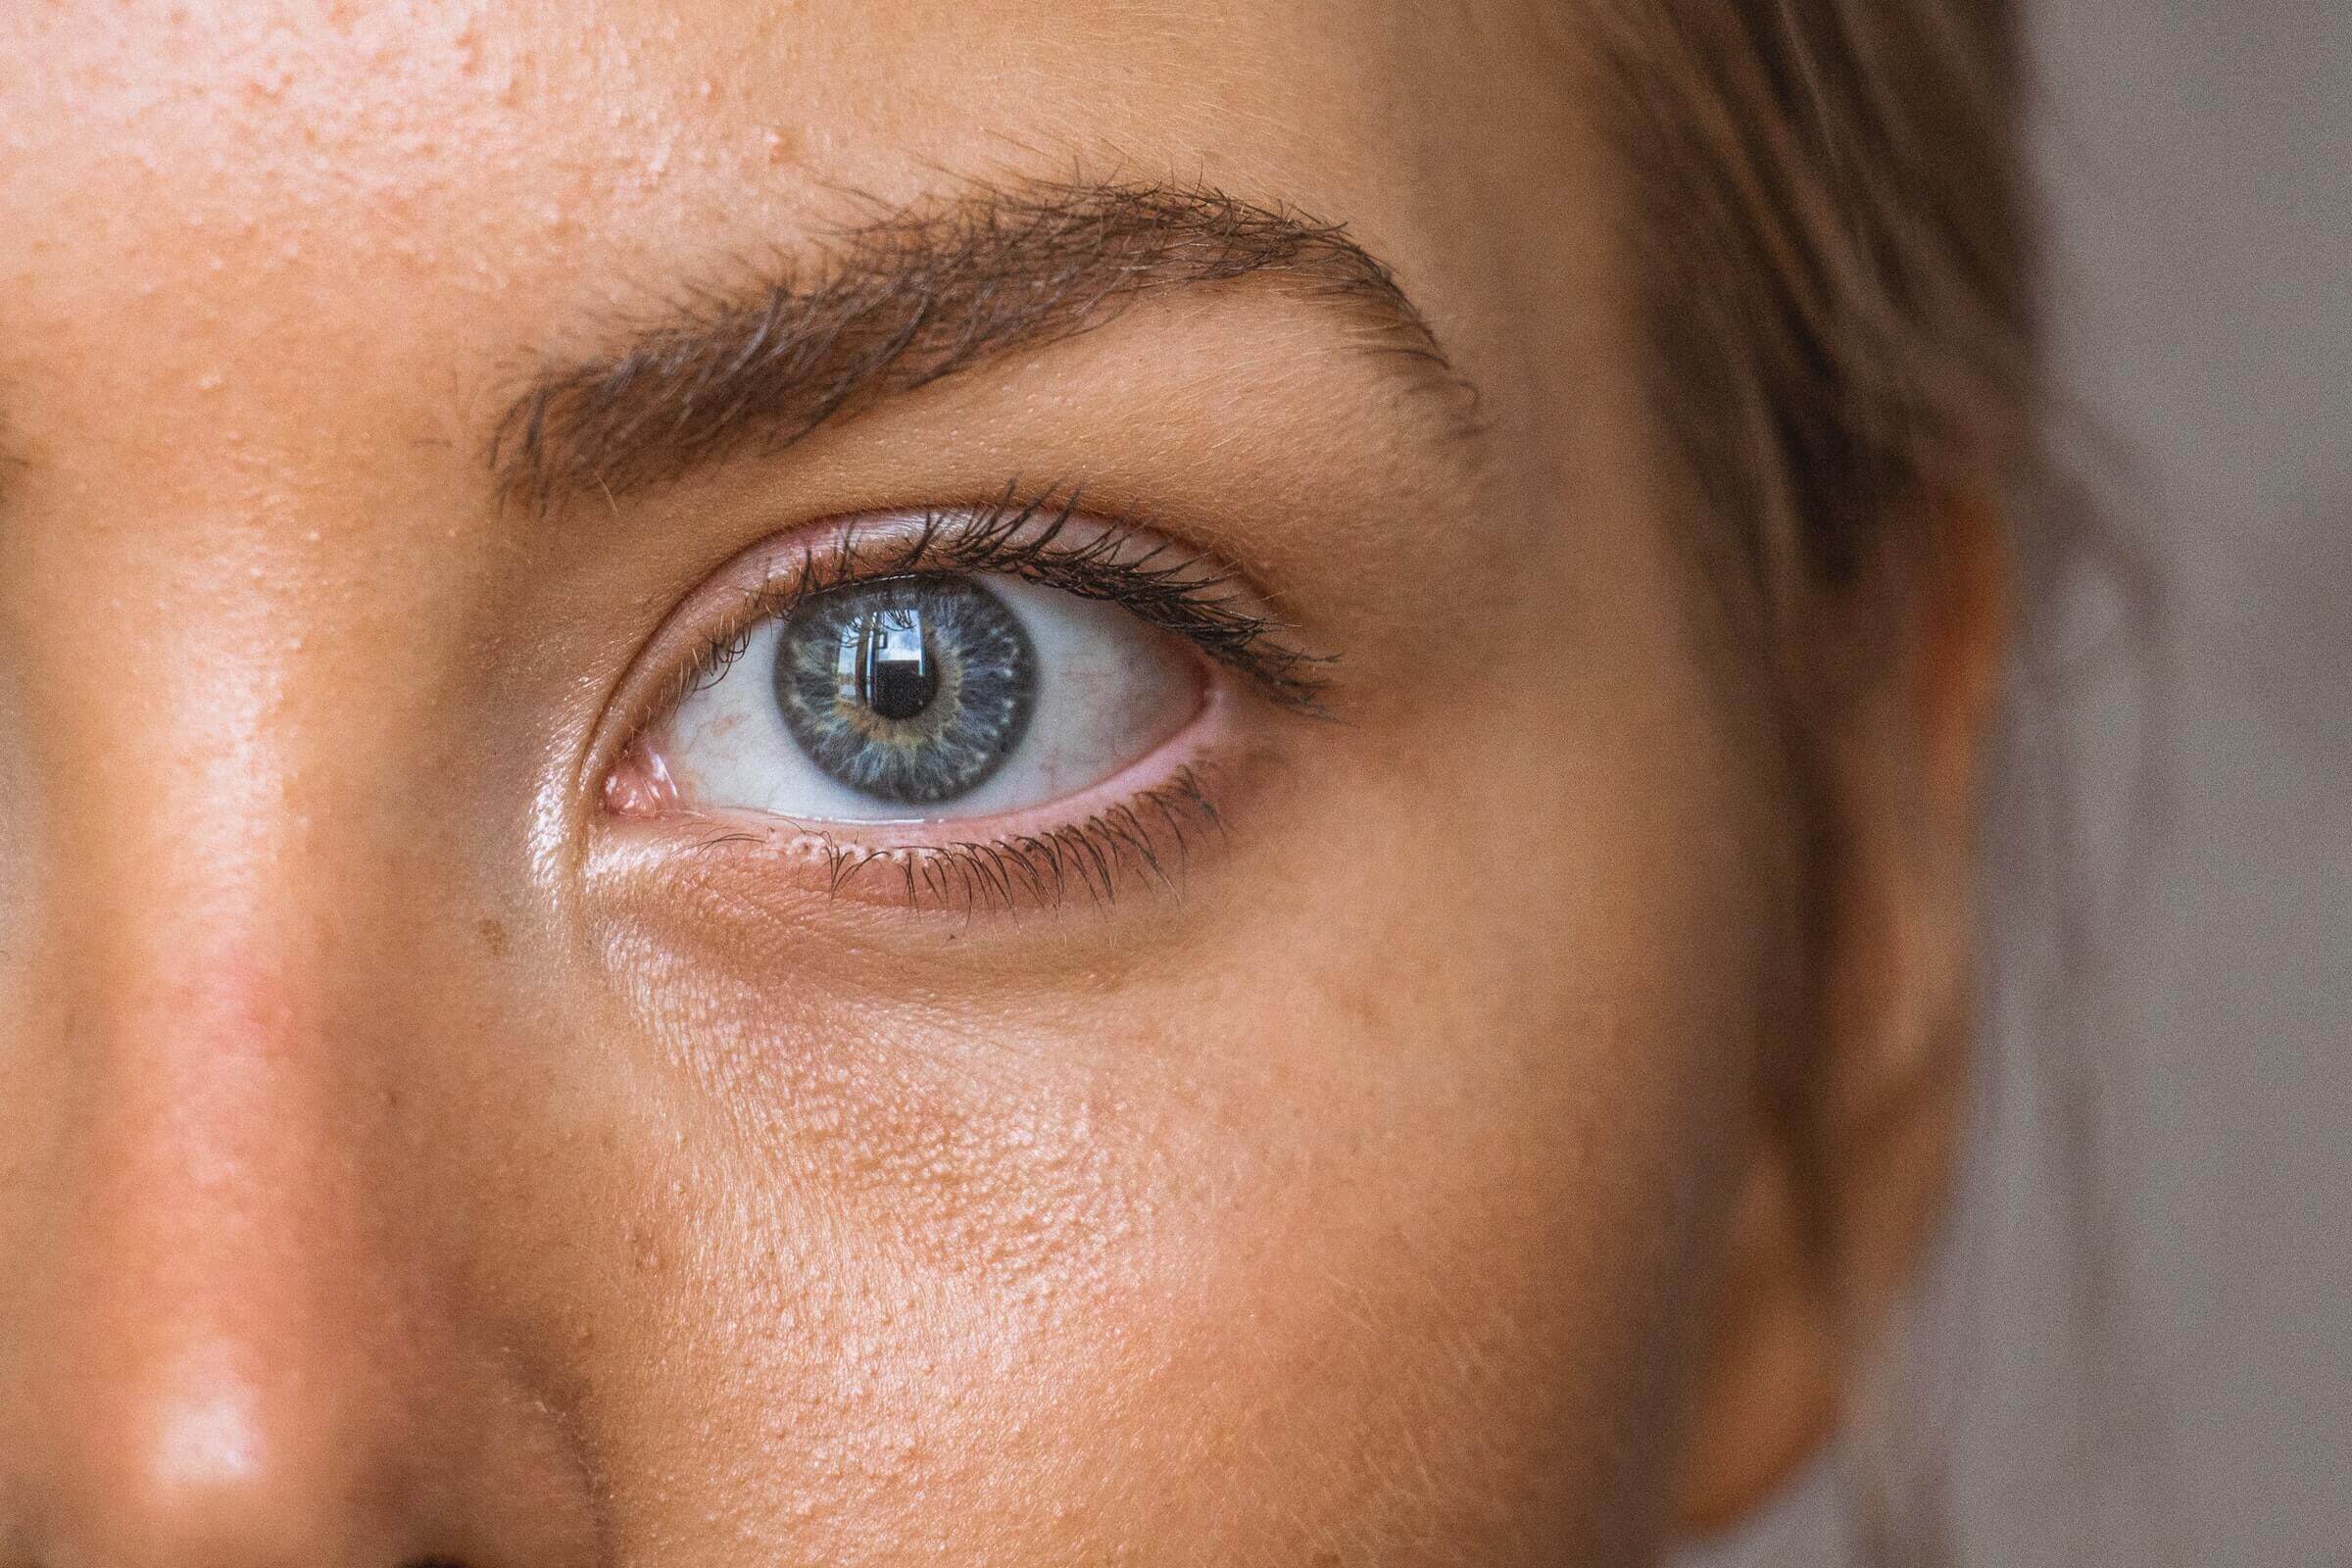 What Really Causes Puffy Eyes and Eye Bags?